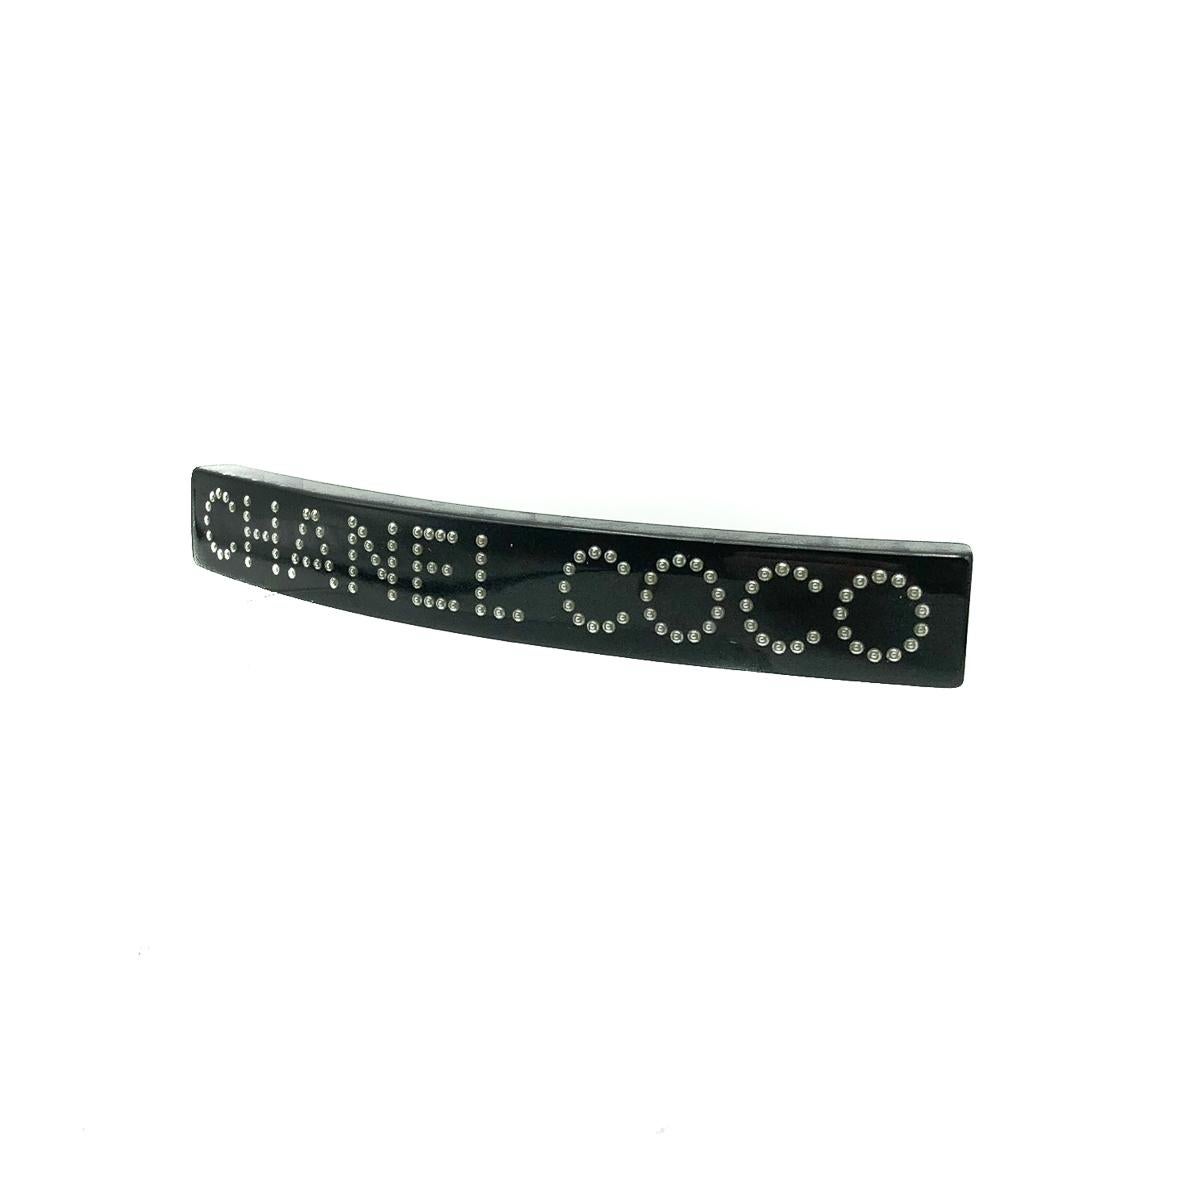 coco chanel for hair